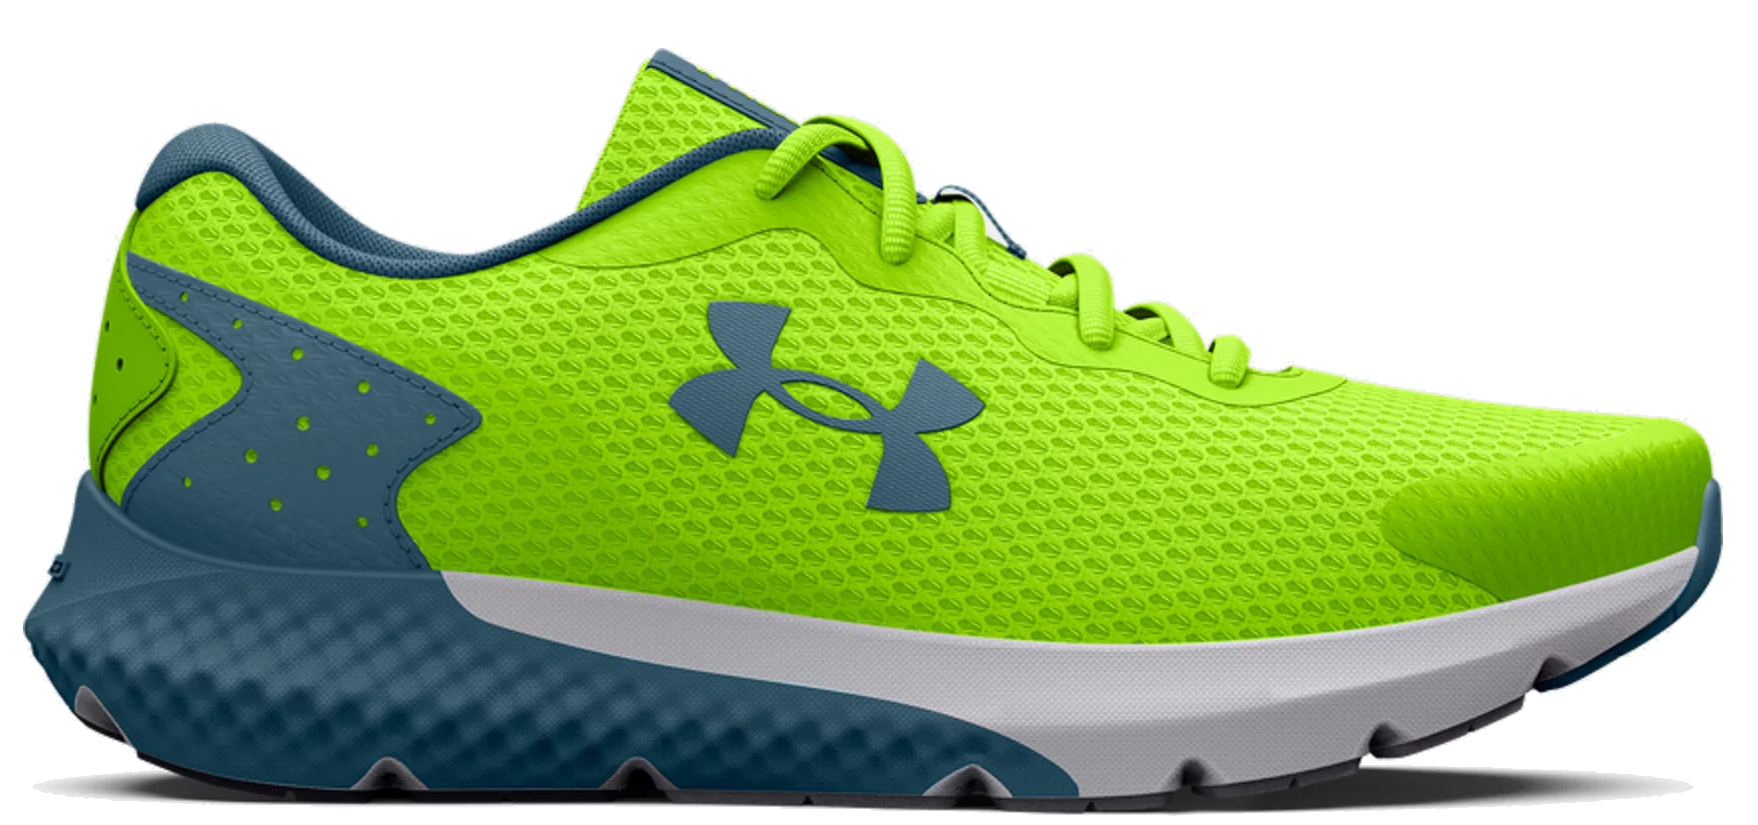 Chaussures de running Under Armour Charged Rogue 3